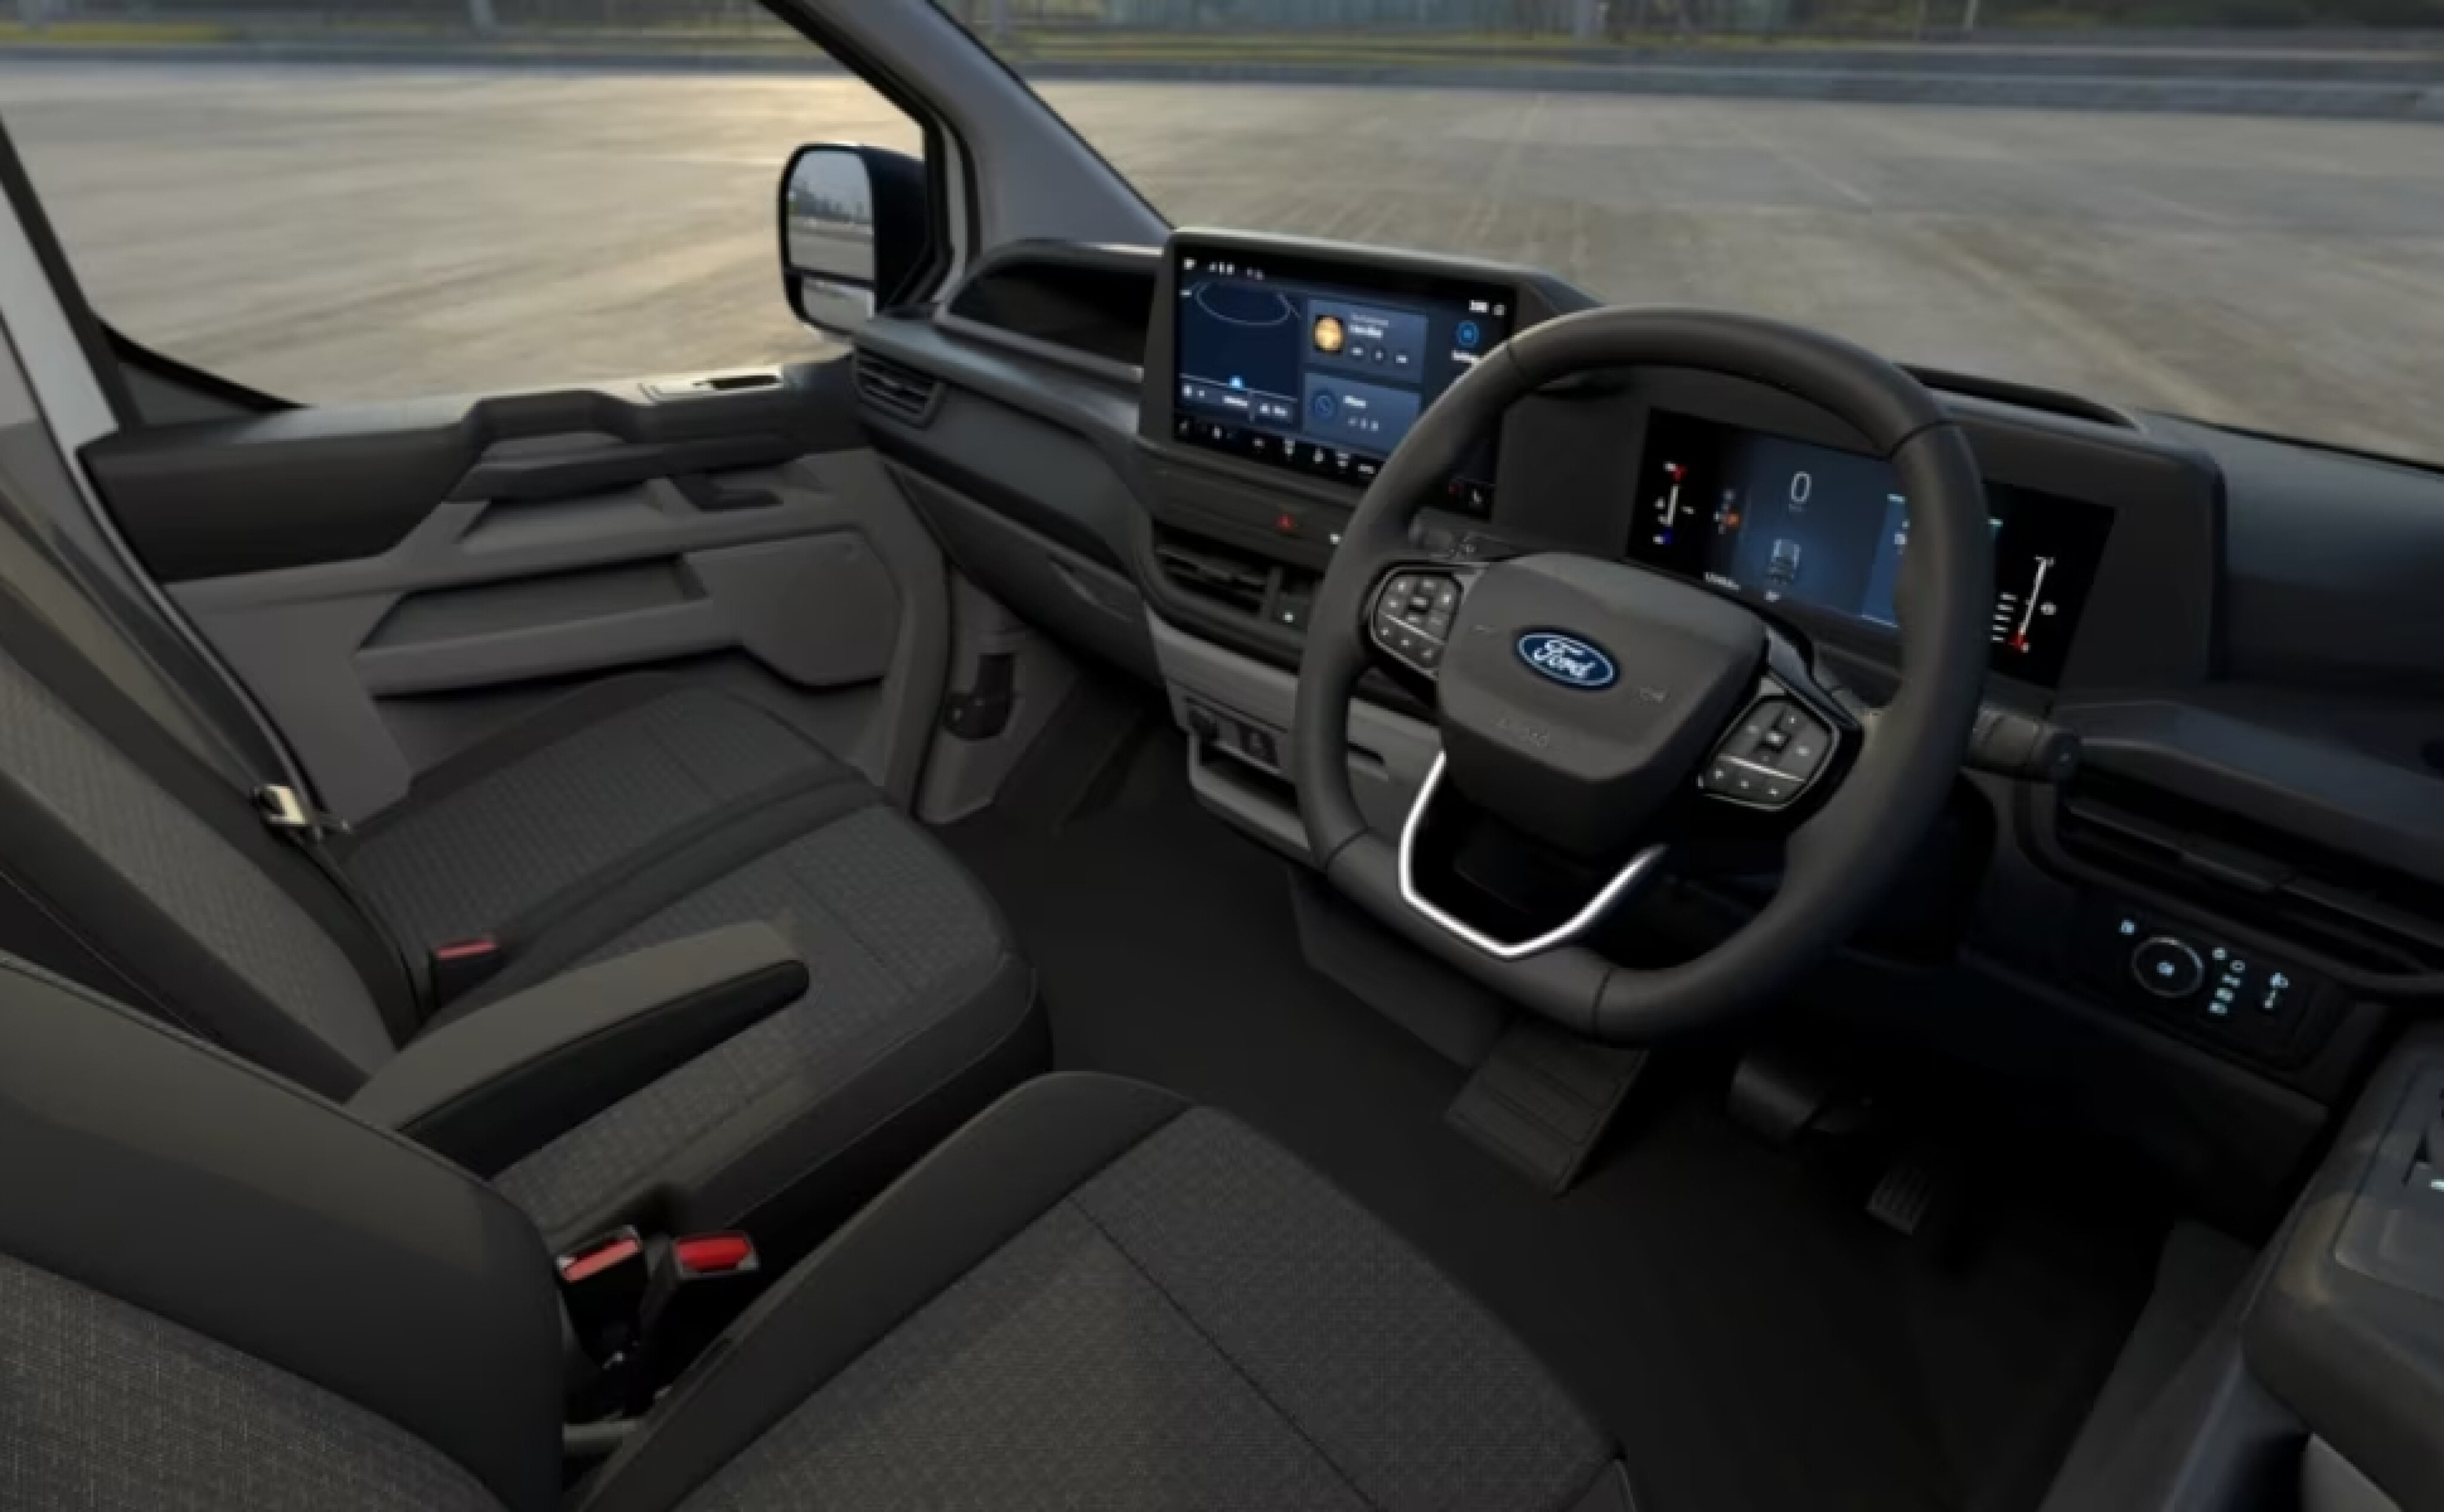 2024 Ford Transit Custom pricing and features